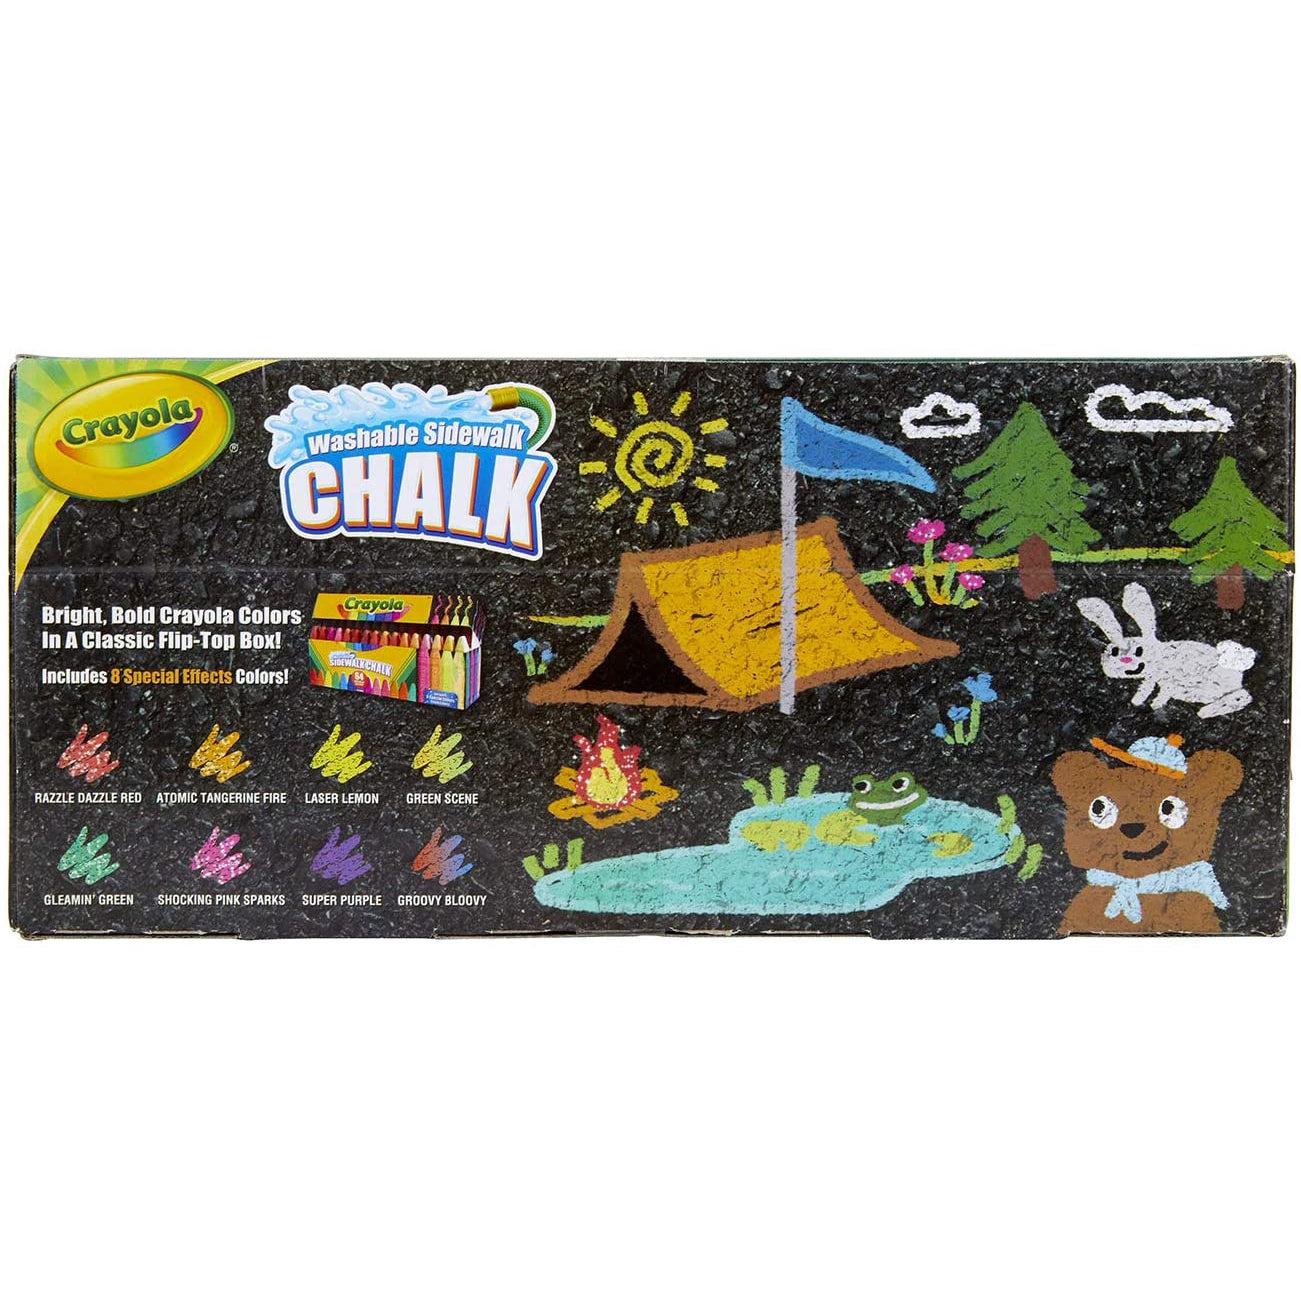 Front view of the box of Crayola 64 count Ultimate Washable Sidewalk Chalk.